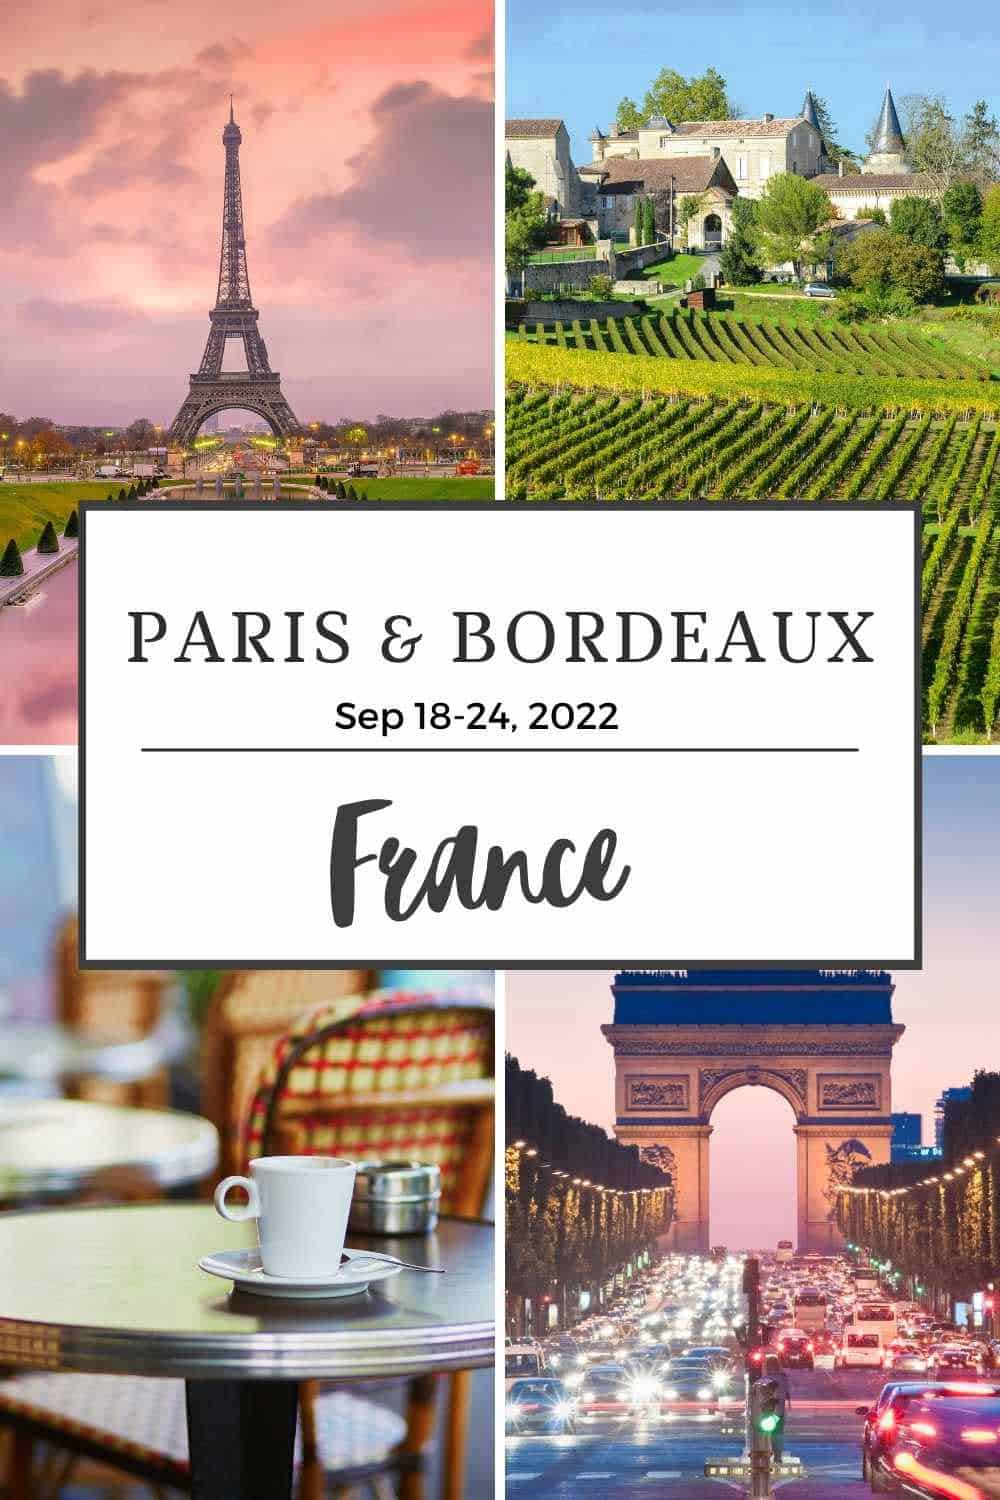 Come travel with us to France